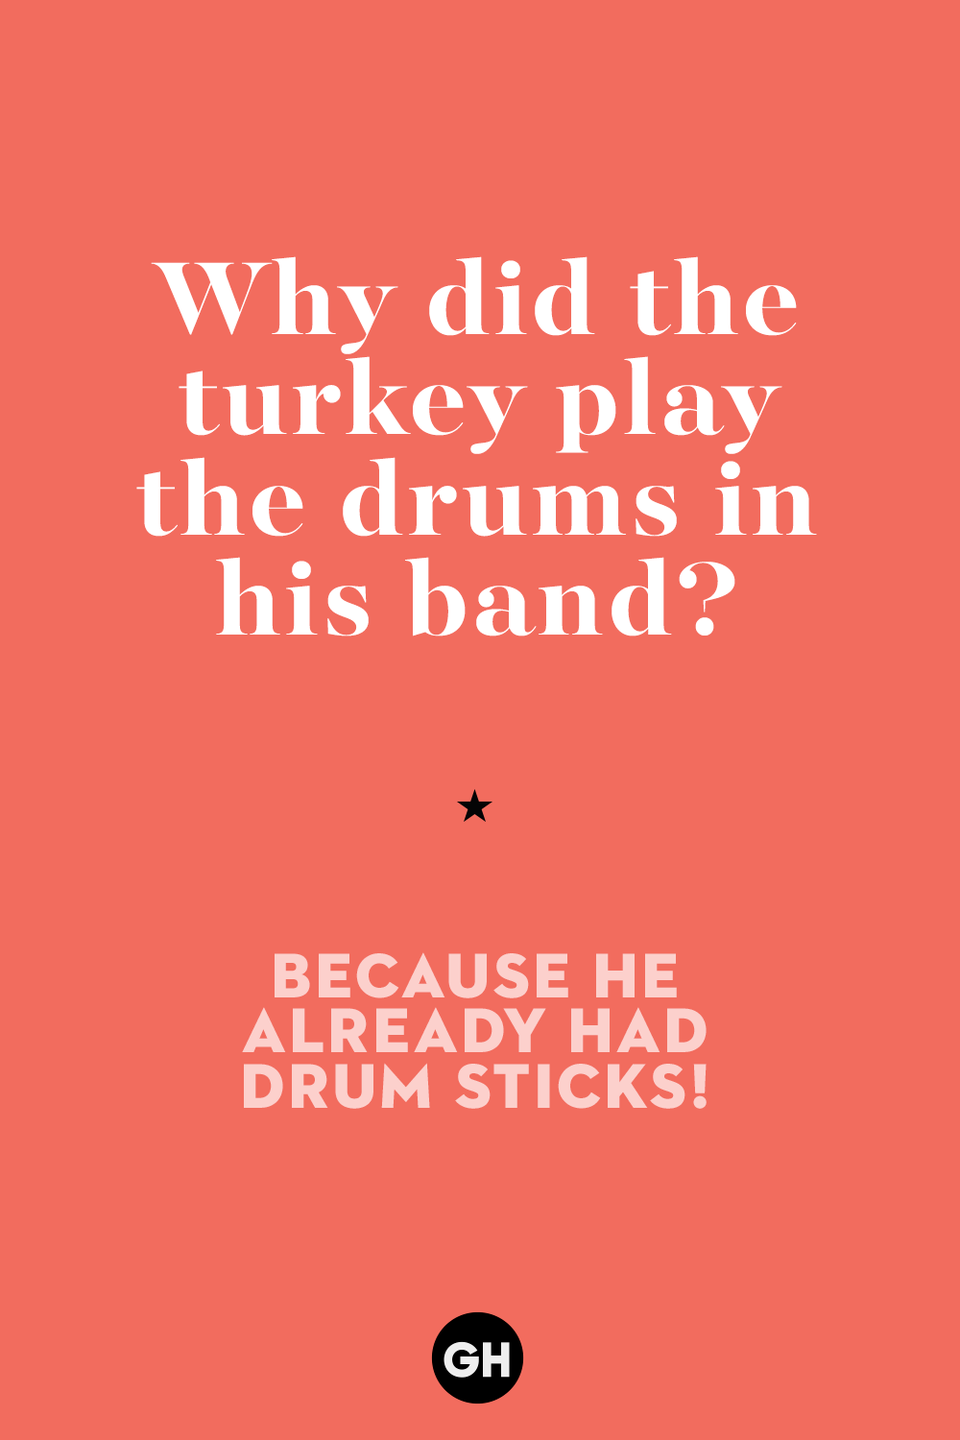 51) Why did the turkey play the drums in his band?